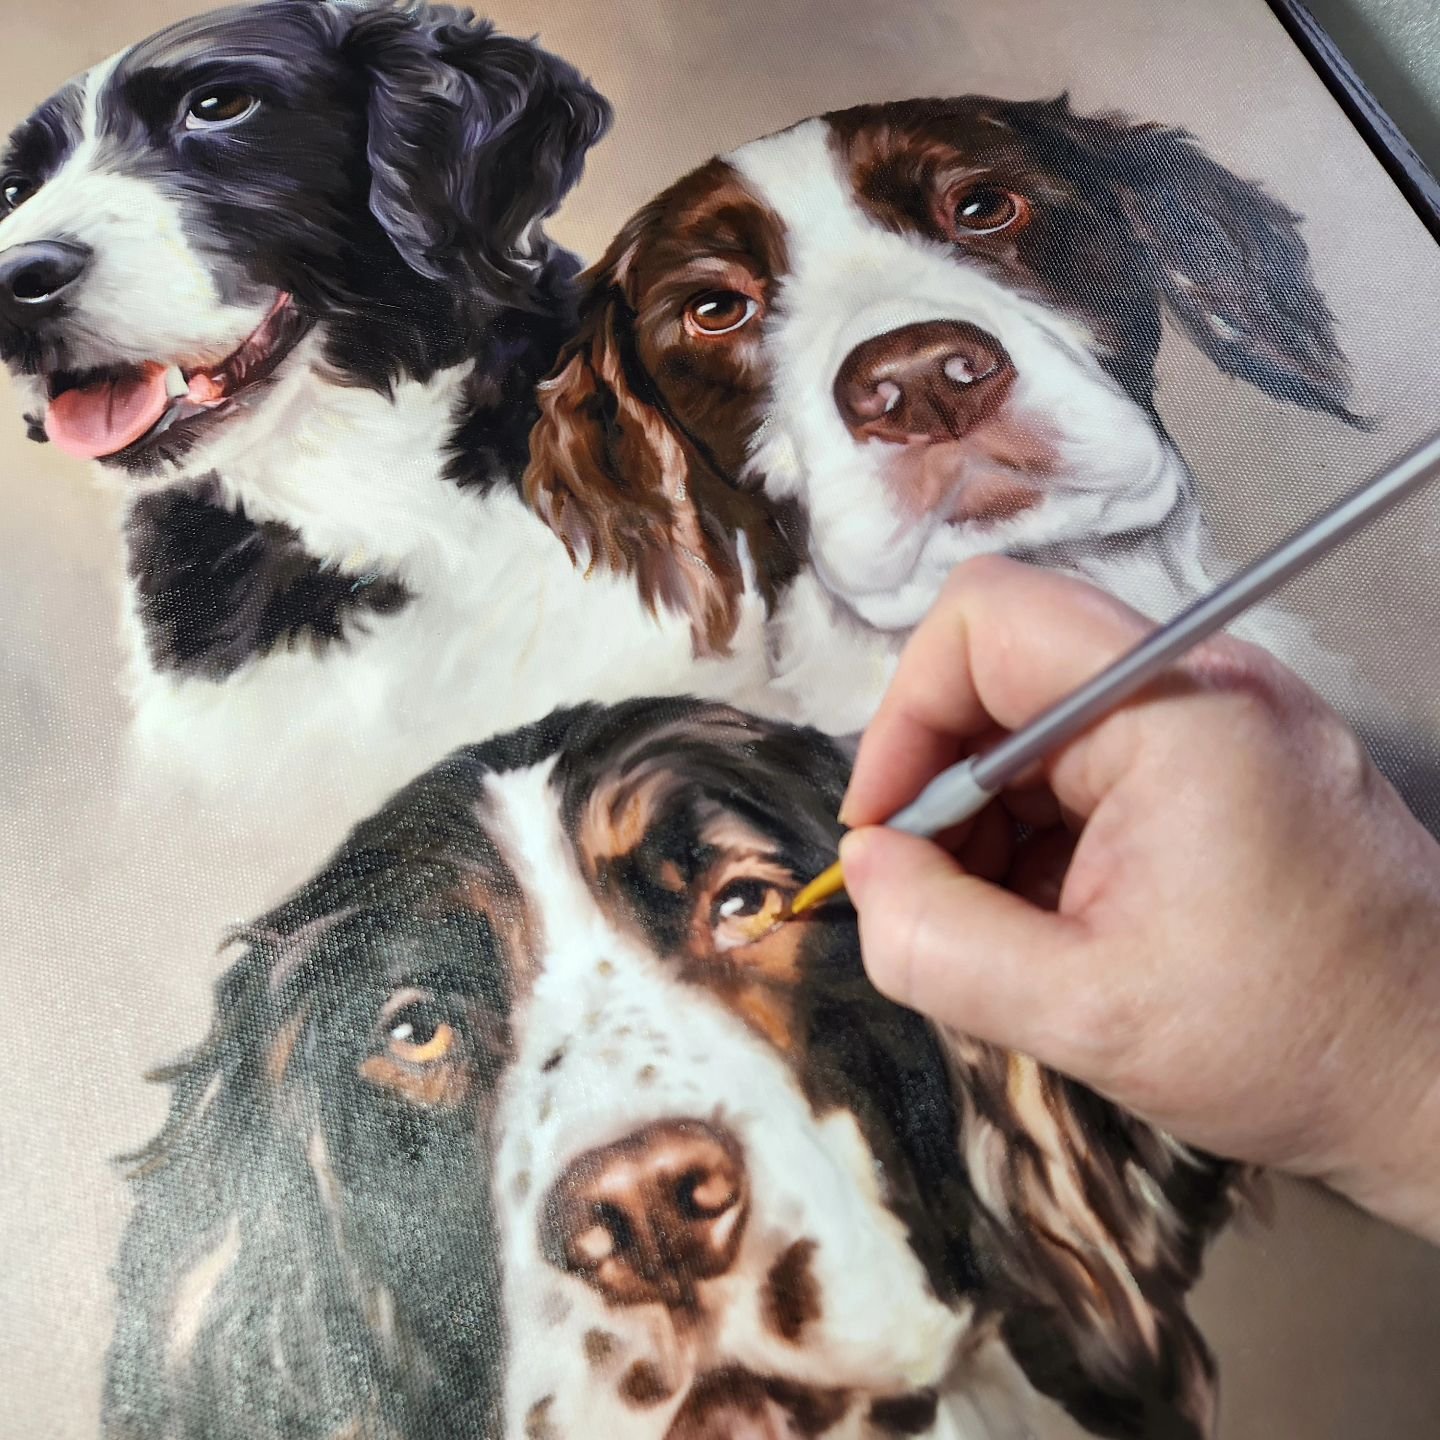 Putting the finishing touches on these beautiful girls.

#dogart #dogpainting #spanielsofinstagram